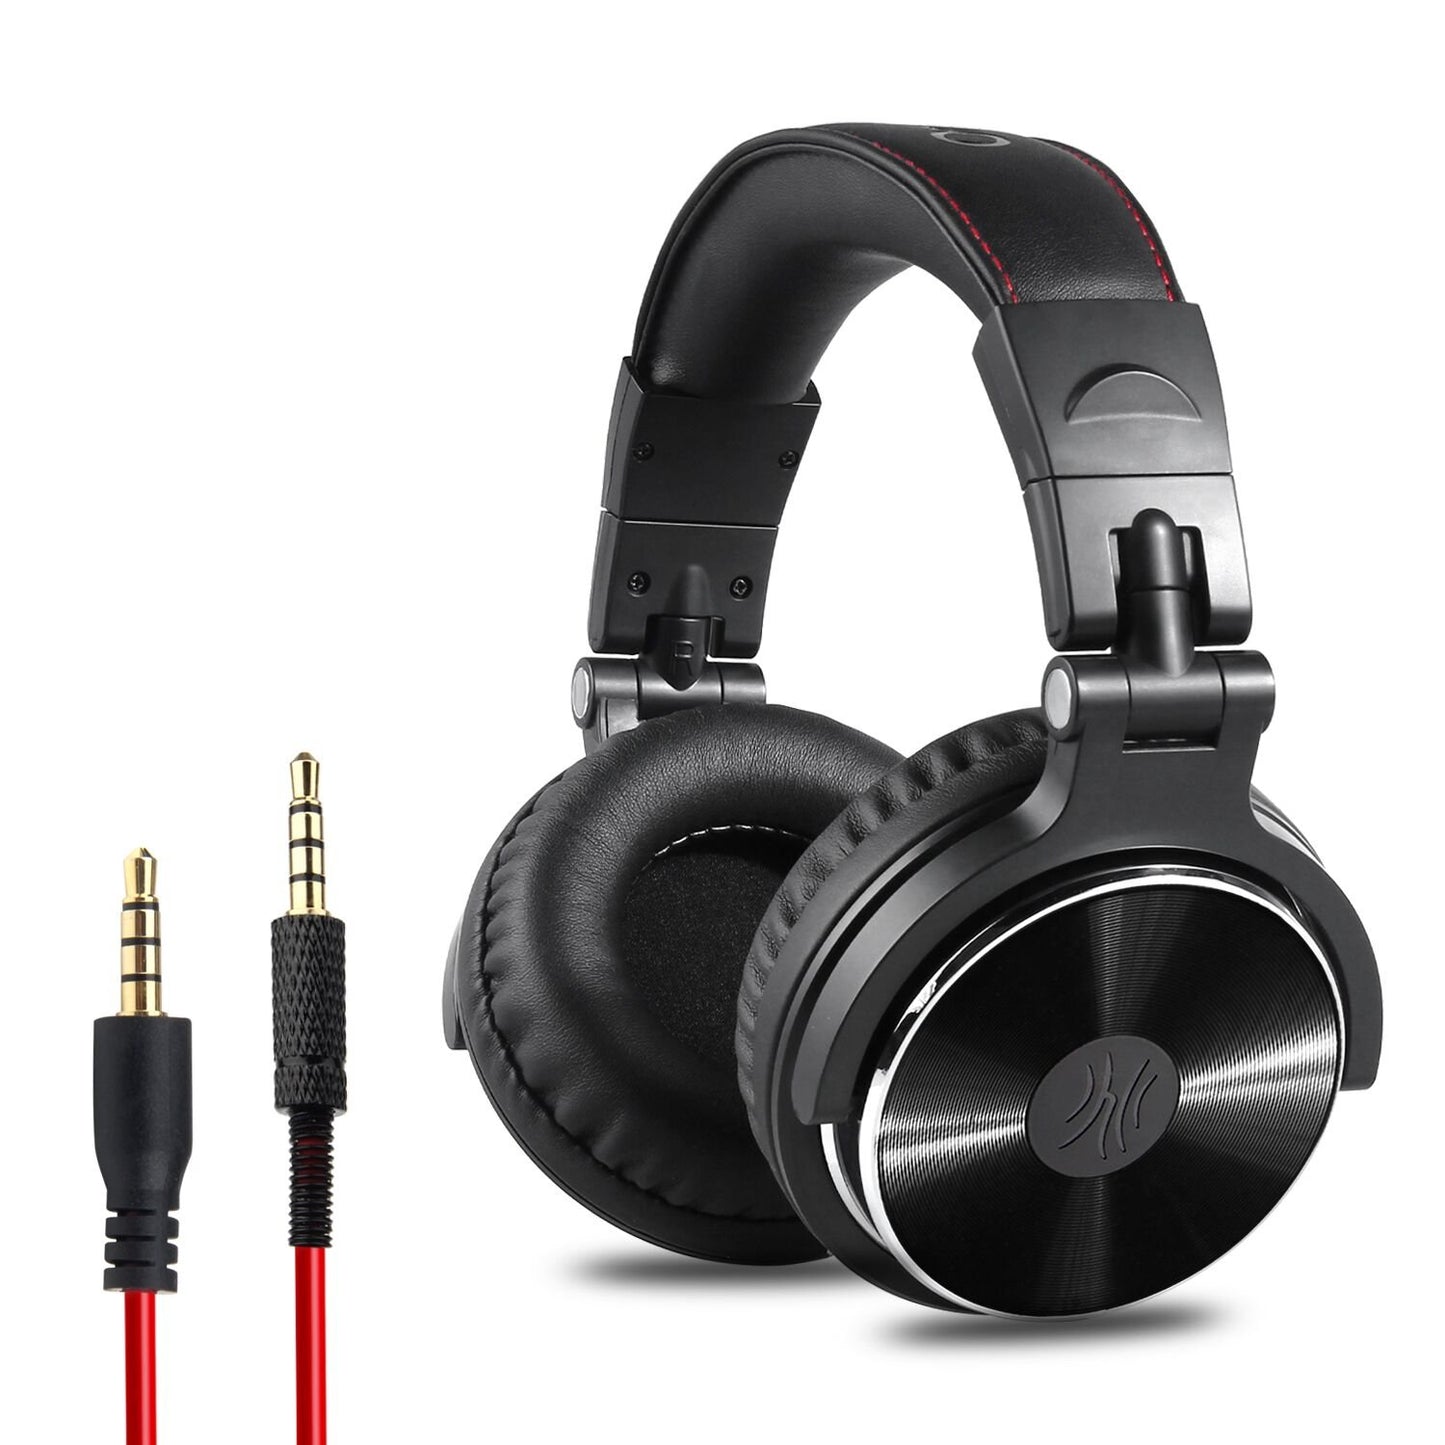 Wired headphones with large earmuffs